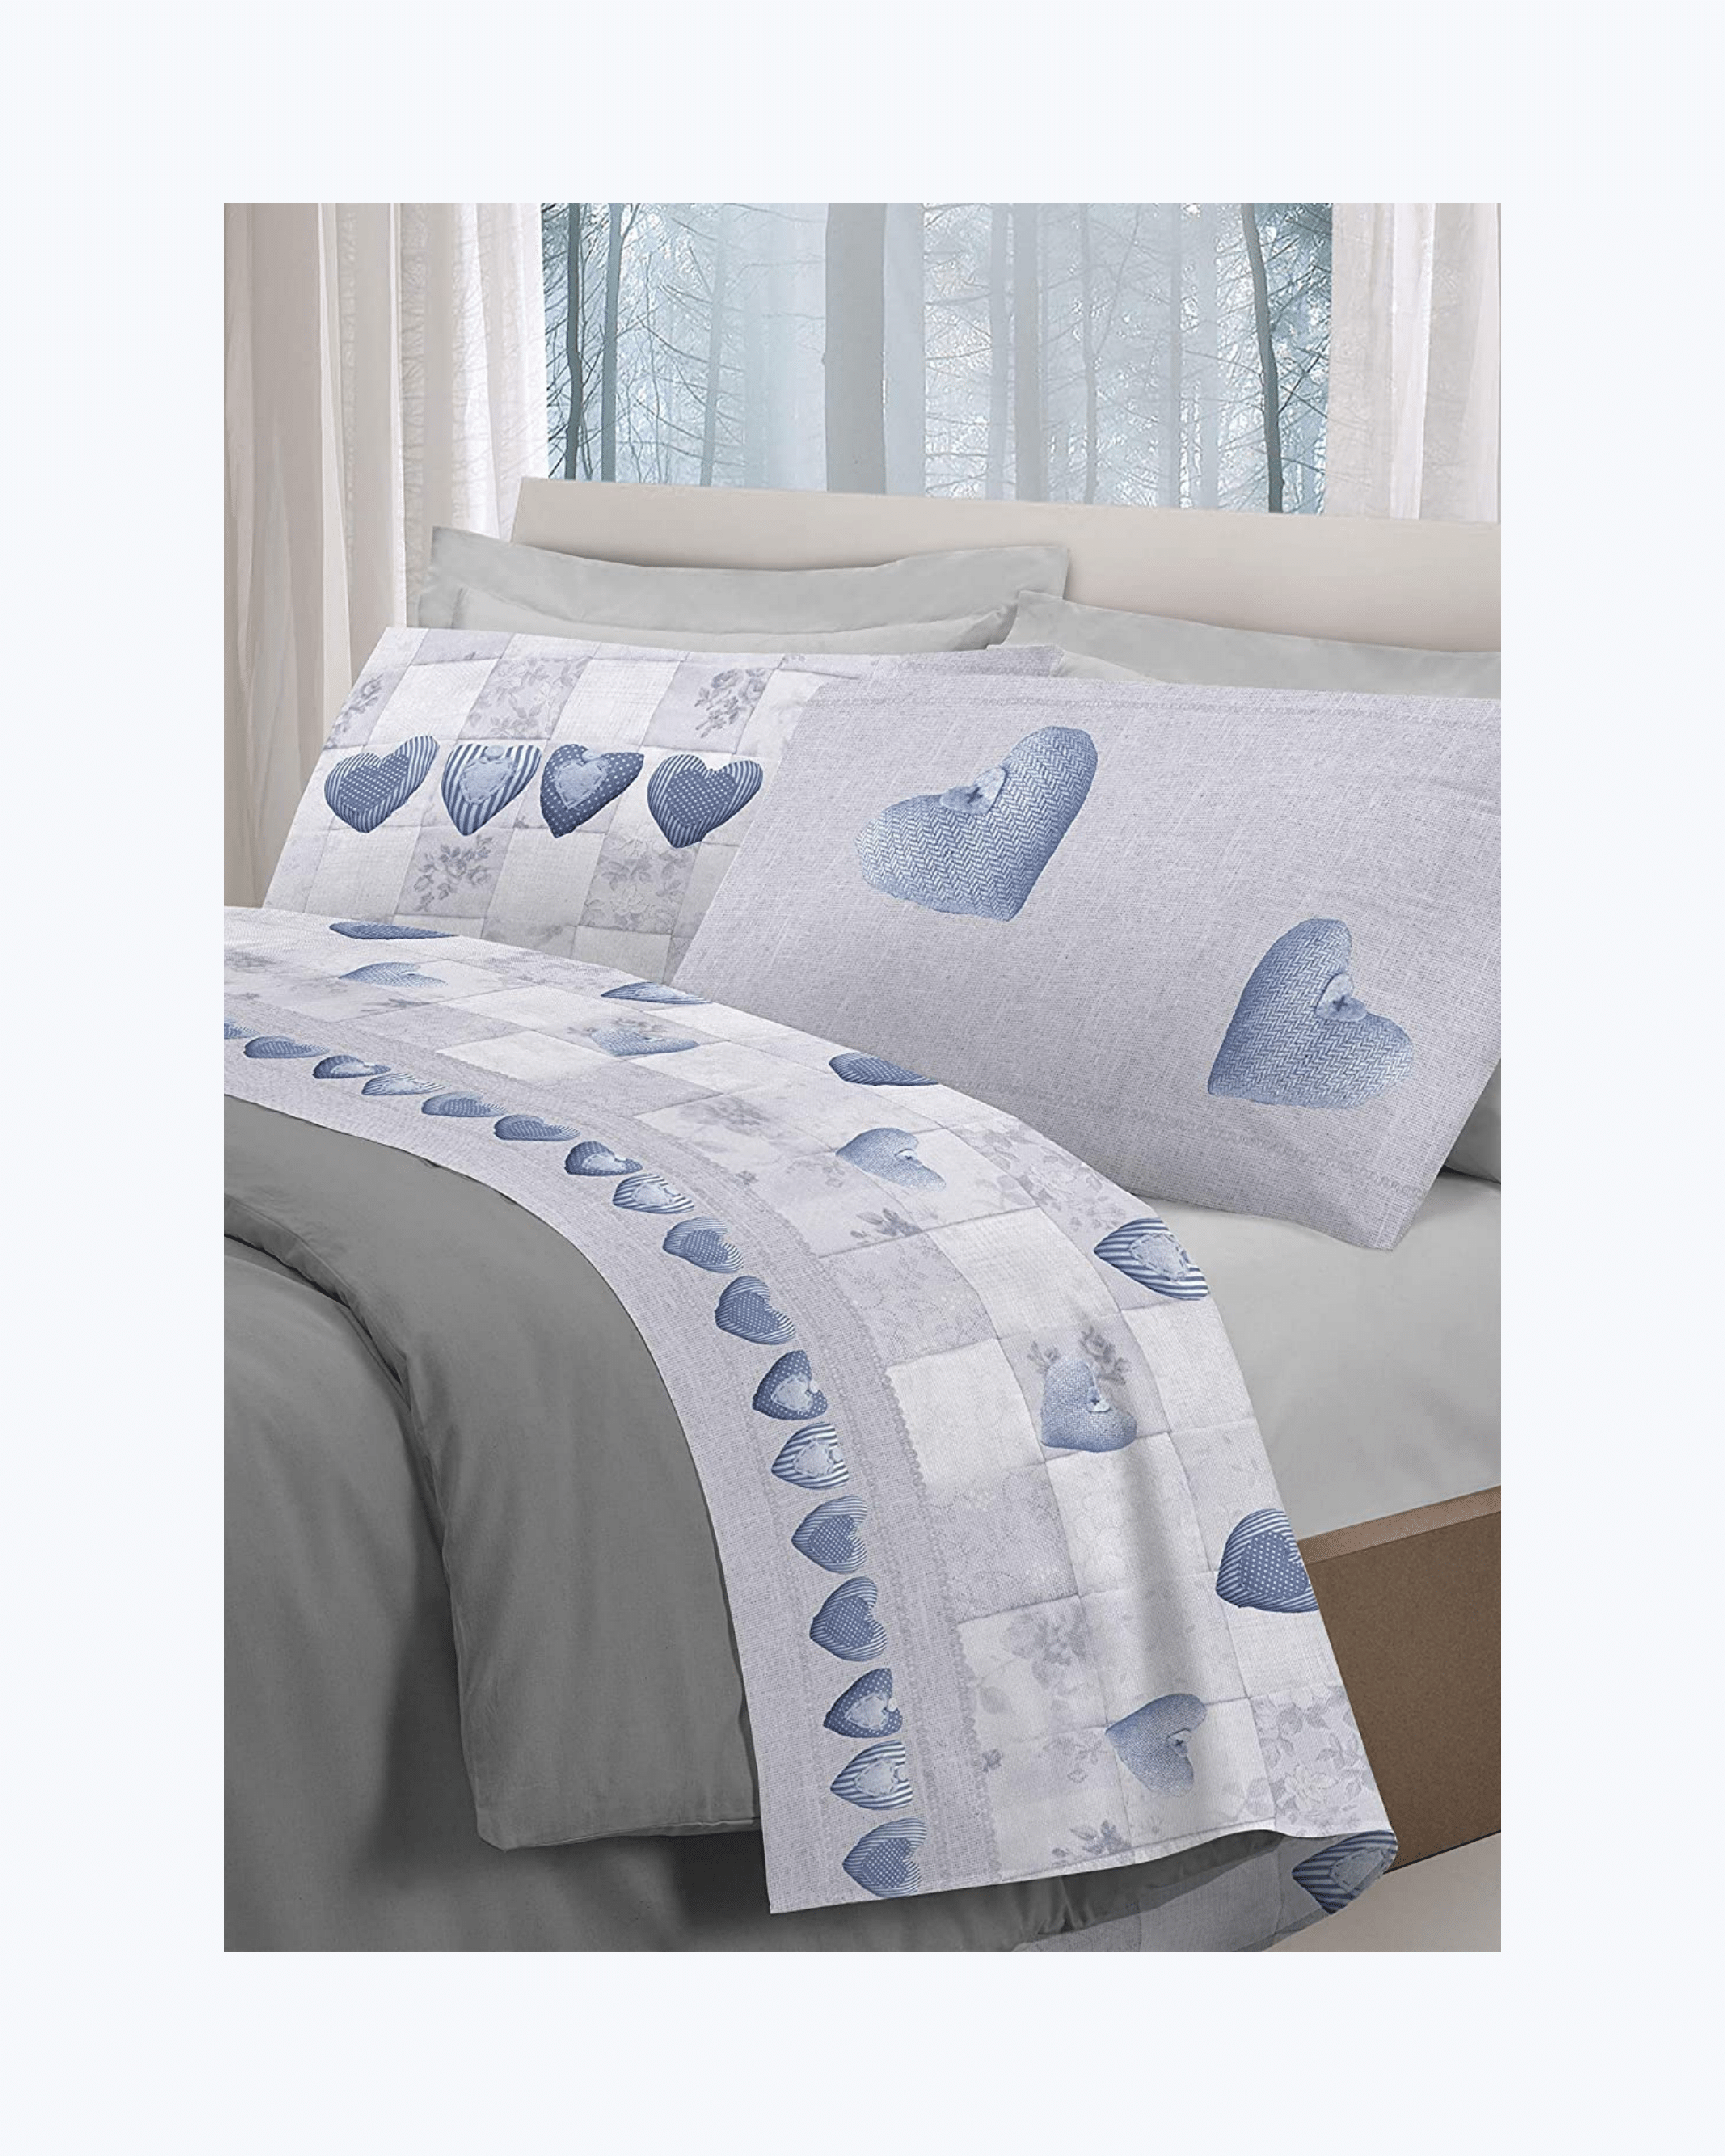 Set Lenzuola Letto in Cotone Made in Italy - Completo Letto Stampa Patchwork Blu